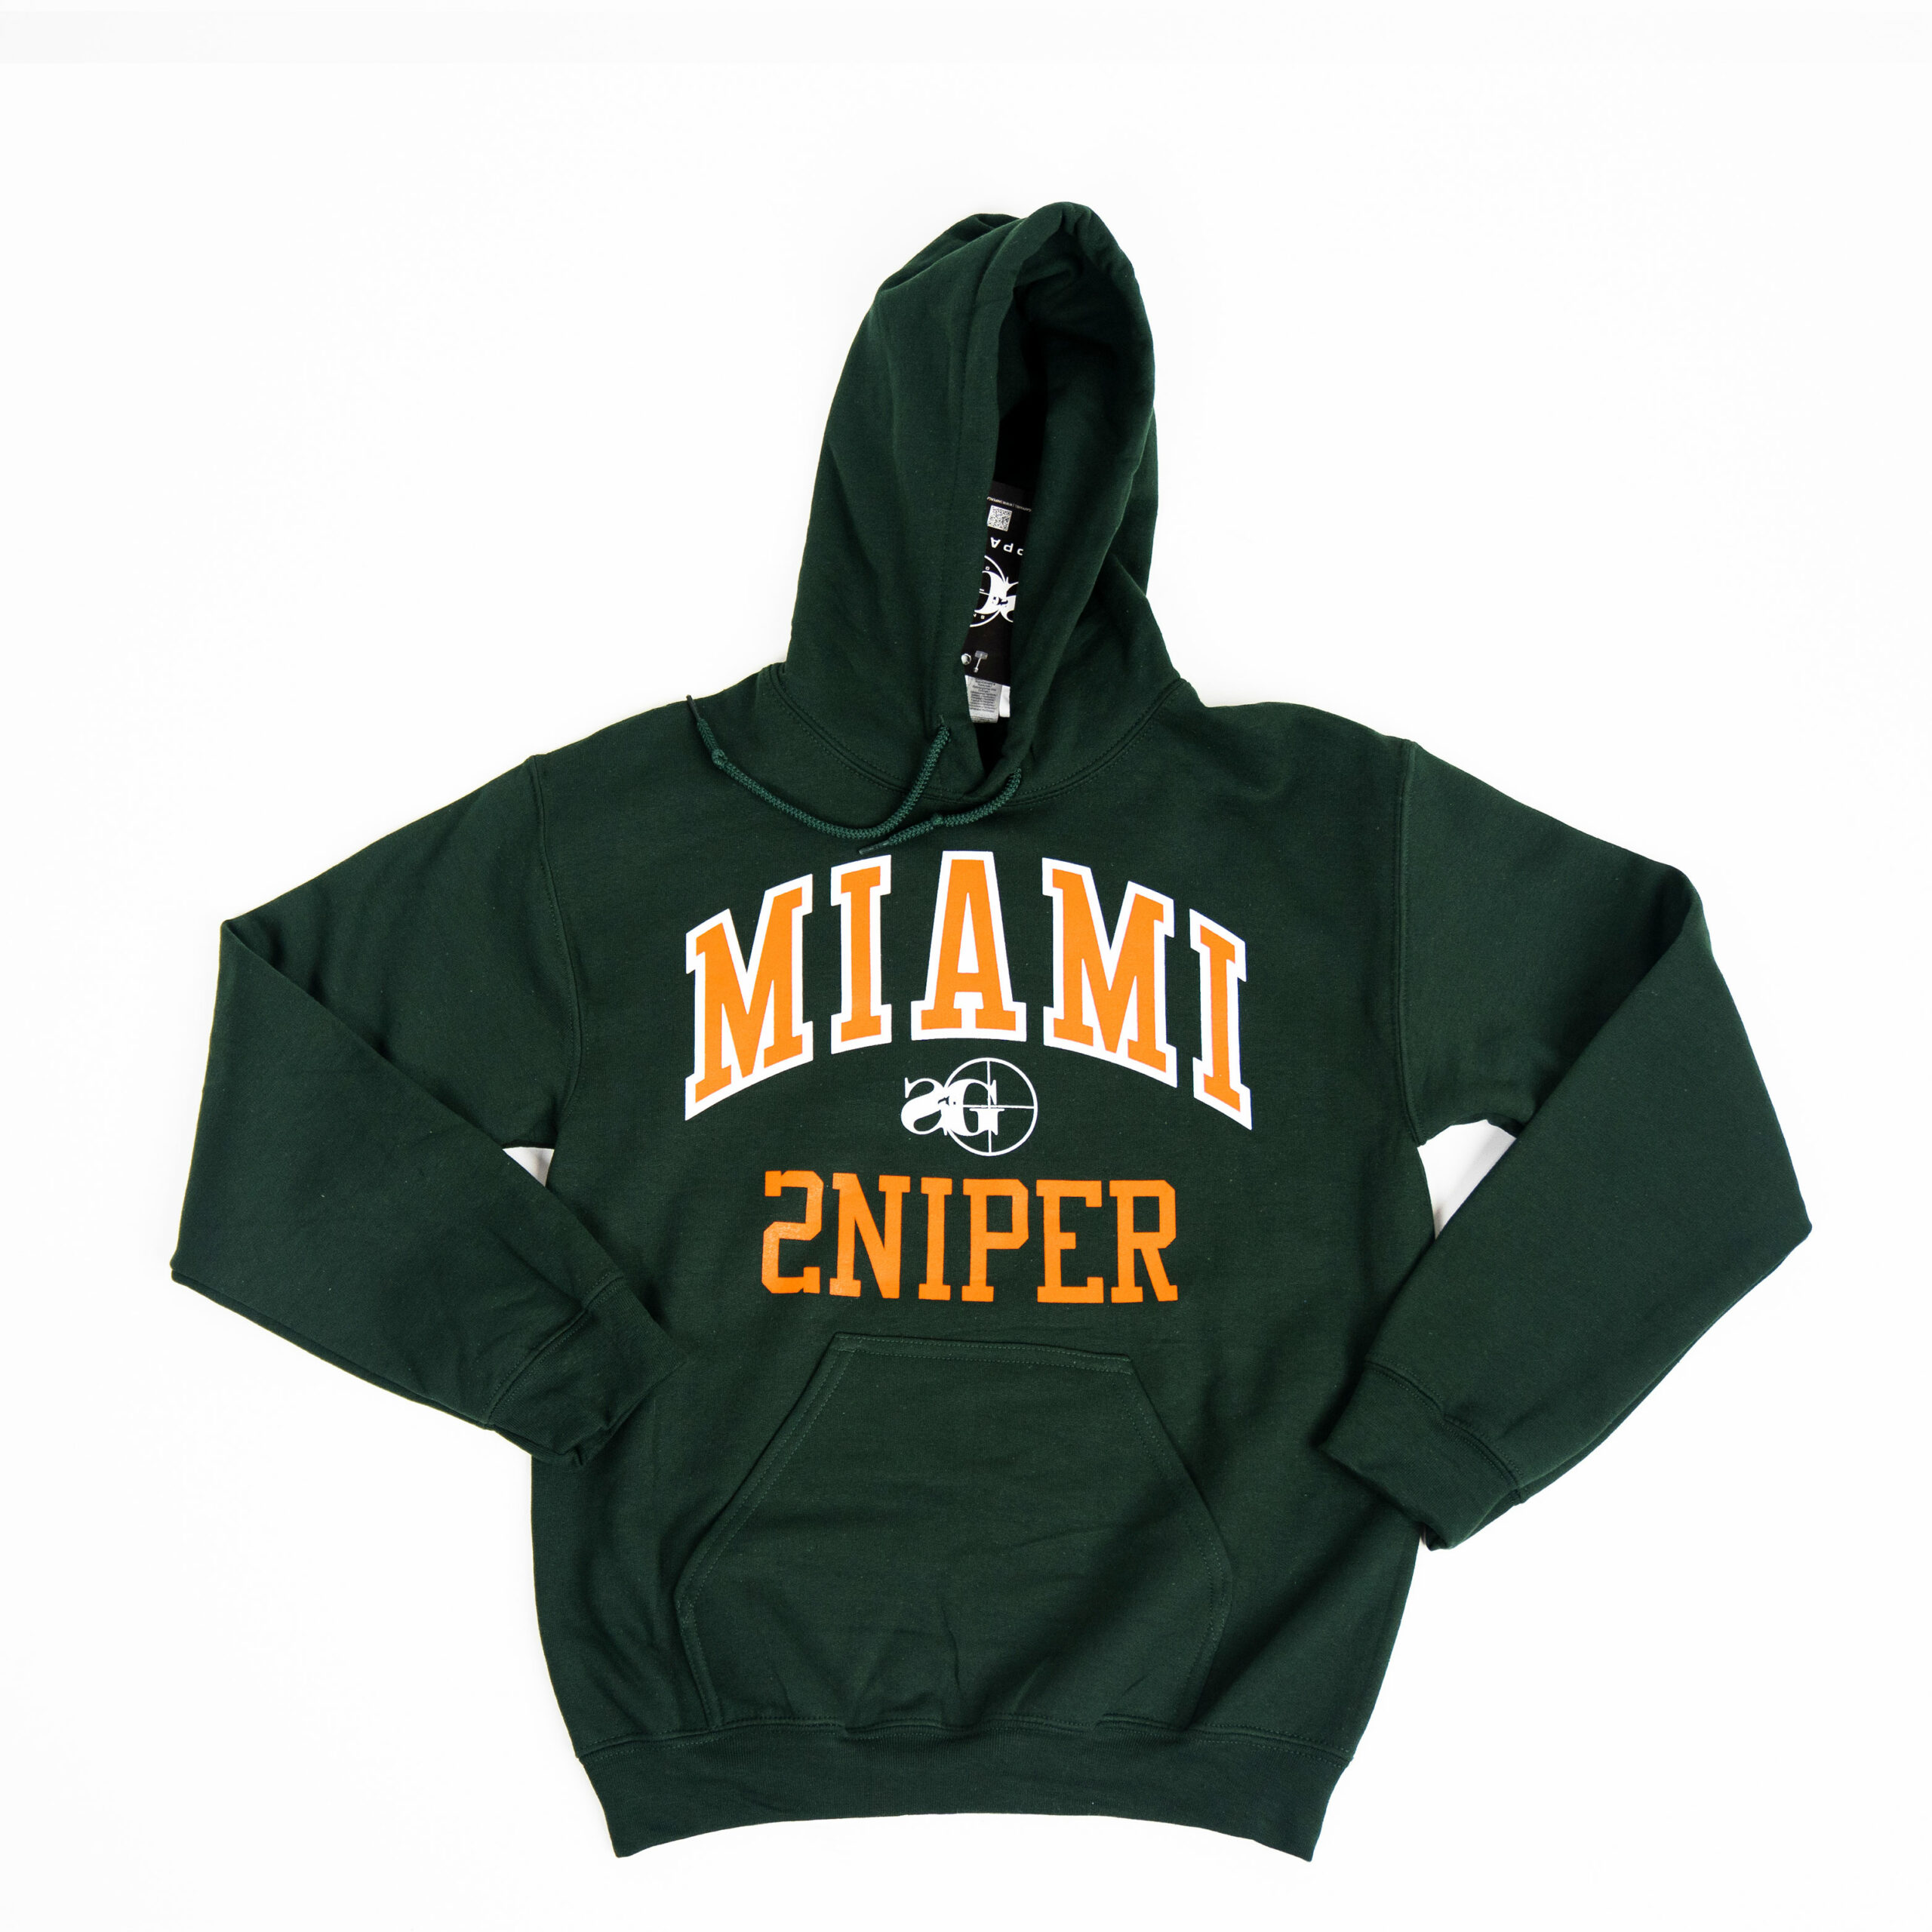 Sniper Gang – HOODIE: SNIPER COLLEGE (MIAMI) – Shirtsy – On Demand Tee ...